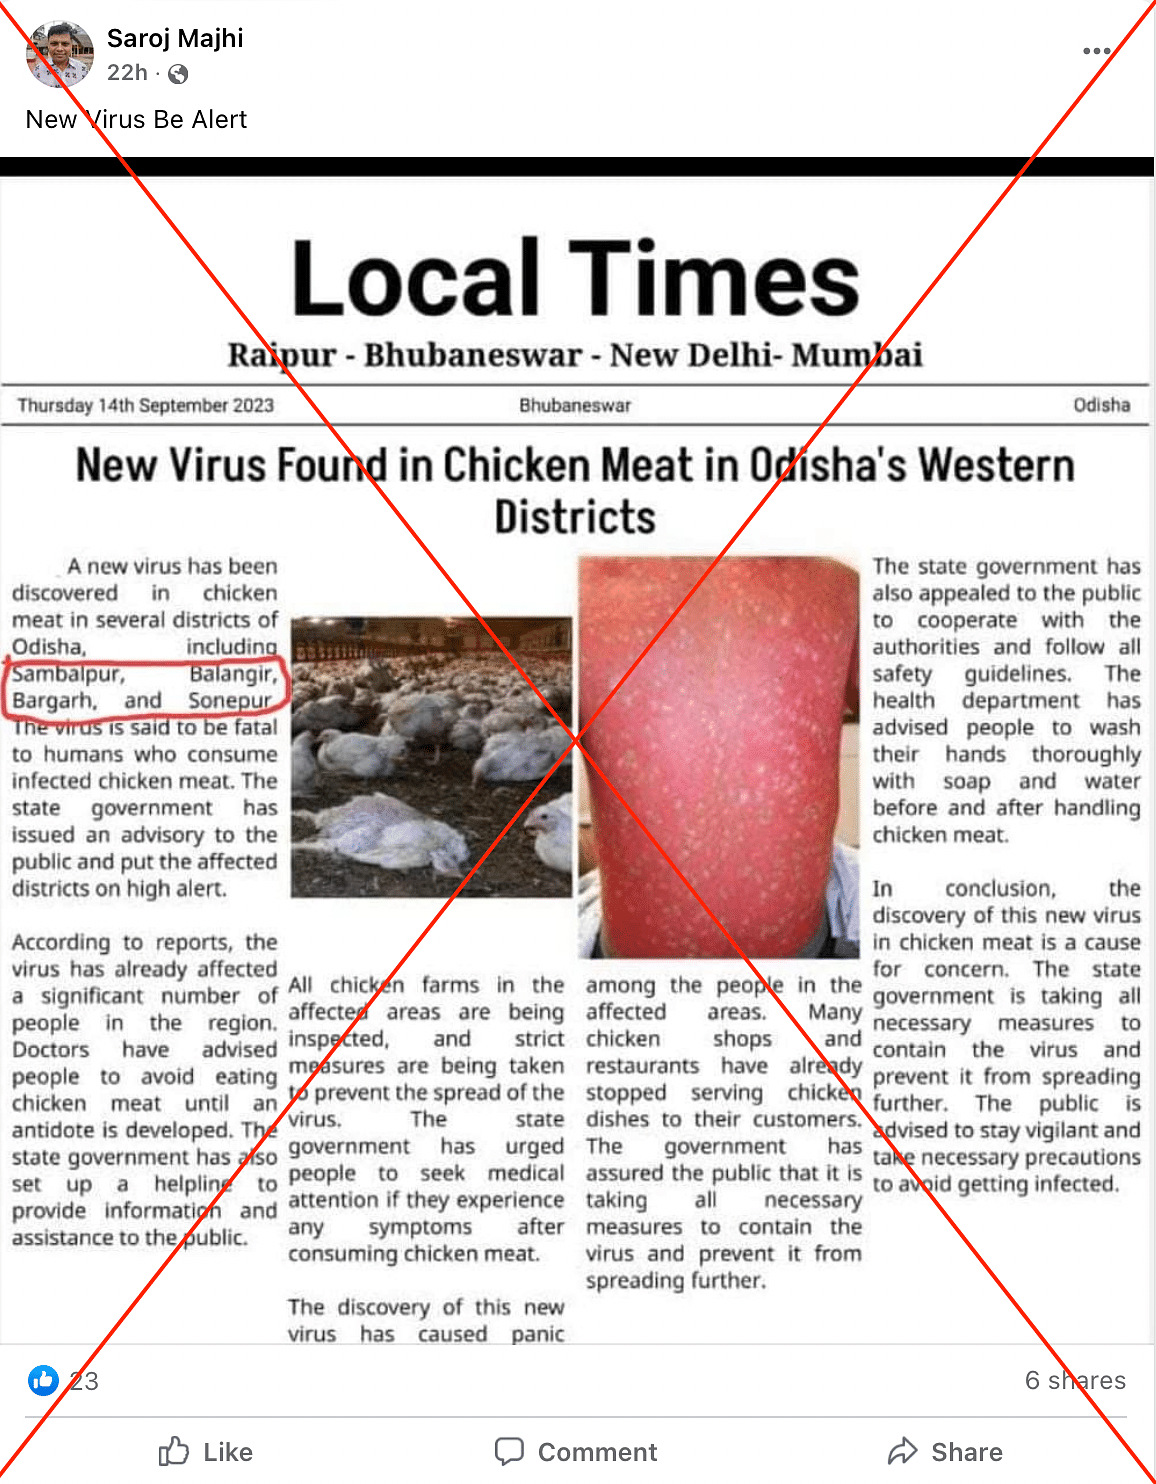 The news clipping about virus being found in chicken meat in Odisha is fabricated.